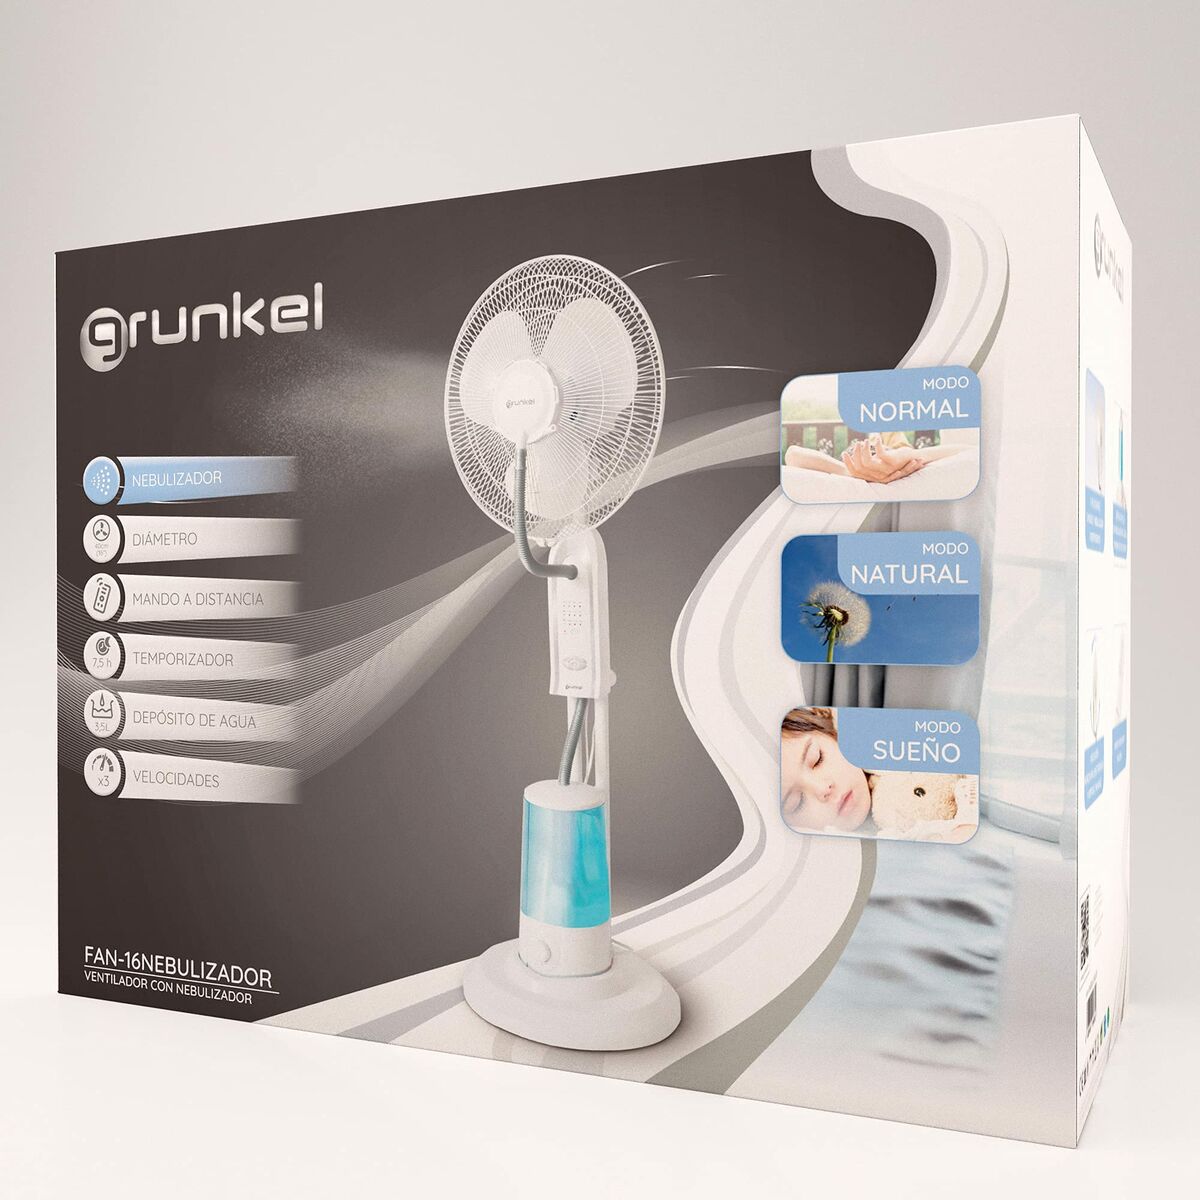 Pedestal Misting Fan Grunkel FAN-16NEBULIZADOR White 75 W, Grunkel, Home and cooking, Portable air conditioning, pedestal-misting-fan-grunkel-fan-16nebulizador-white-75-w, Brand_Grunkel, category-reference-2399, category-reference-2450, category-reference-2451, category-reference-t-19656, category-reference-t-21087, category-reference-t-25217, Condition_NEW, ferretería, office, Price_50 - 100, summer, RiotNook